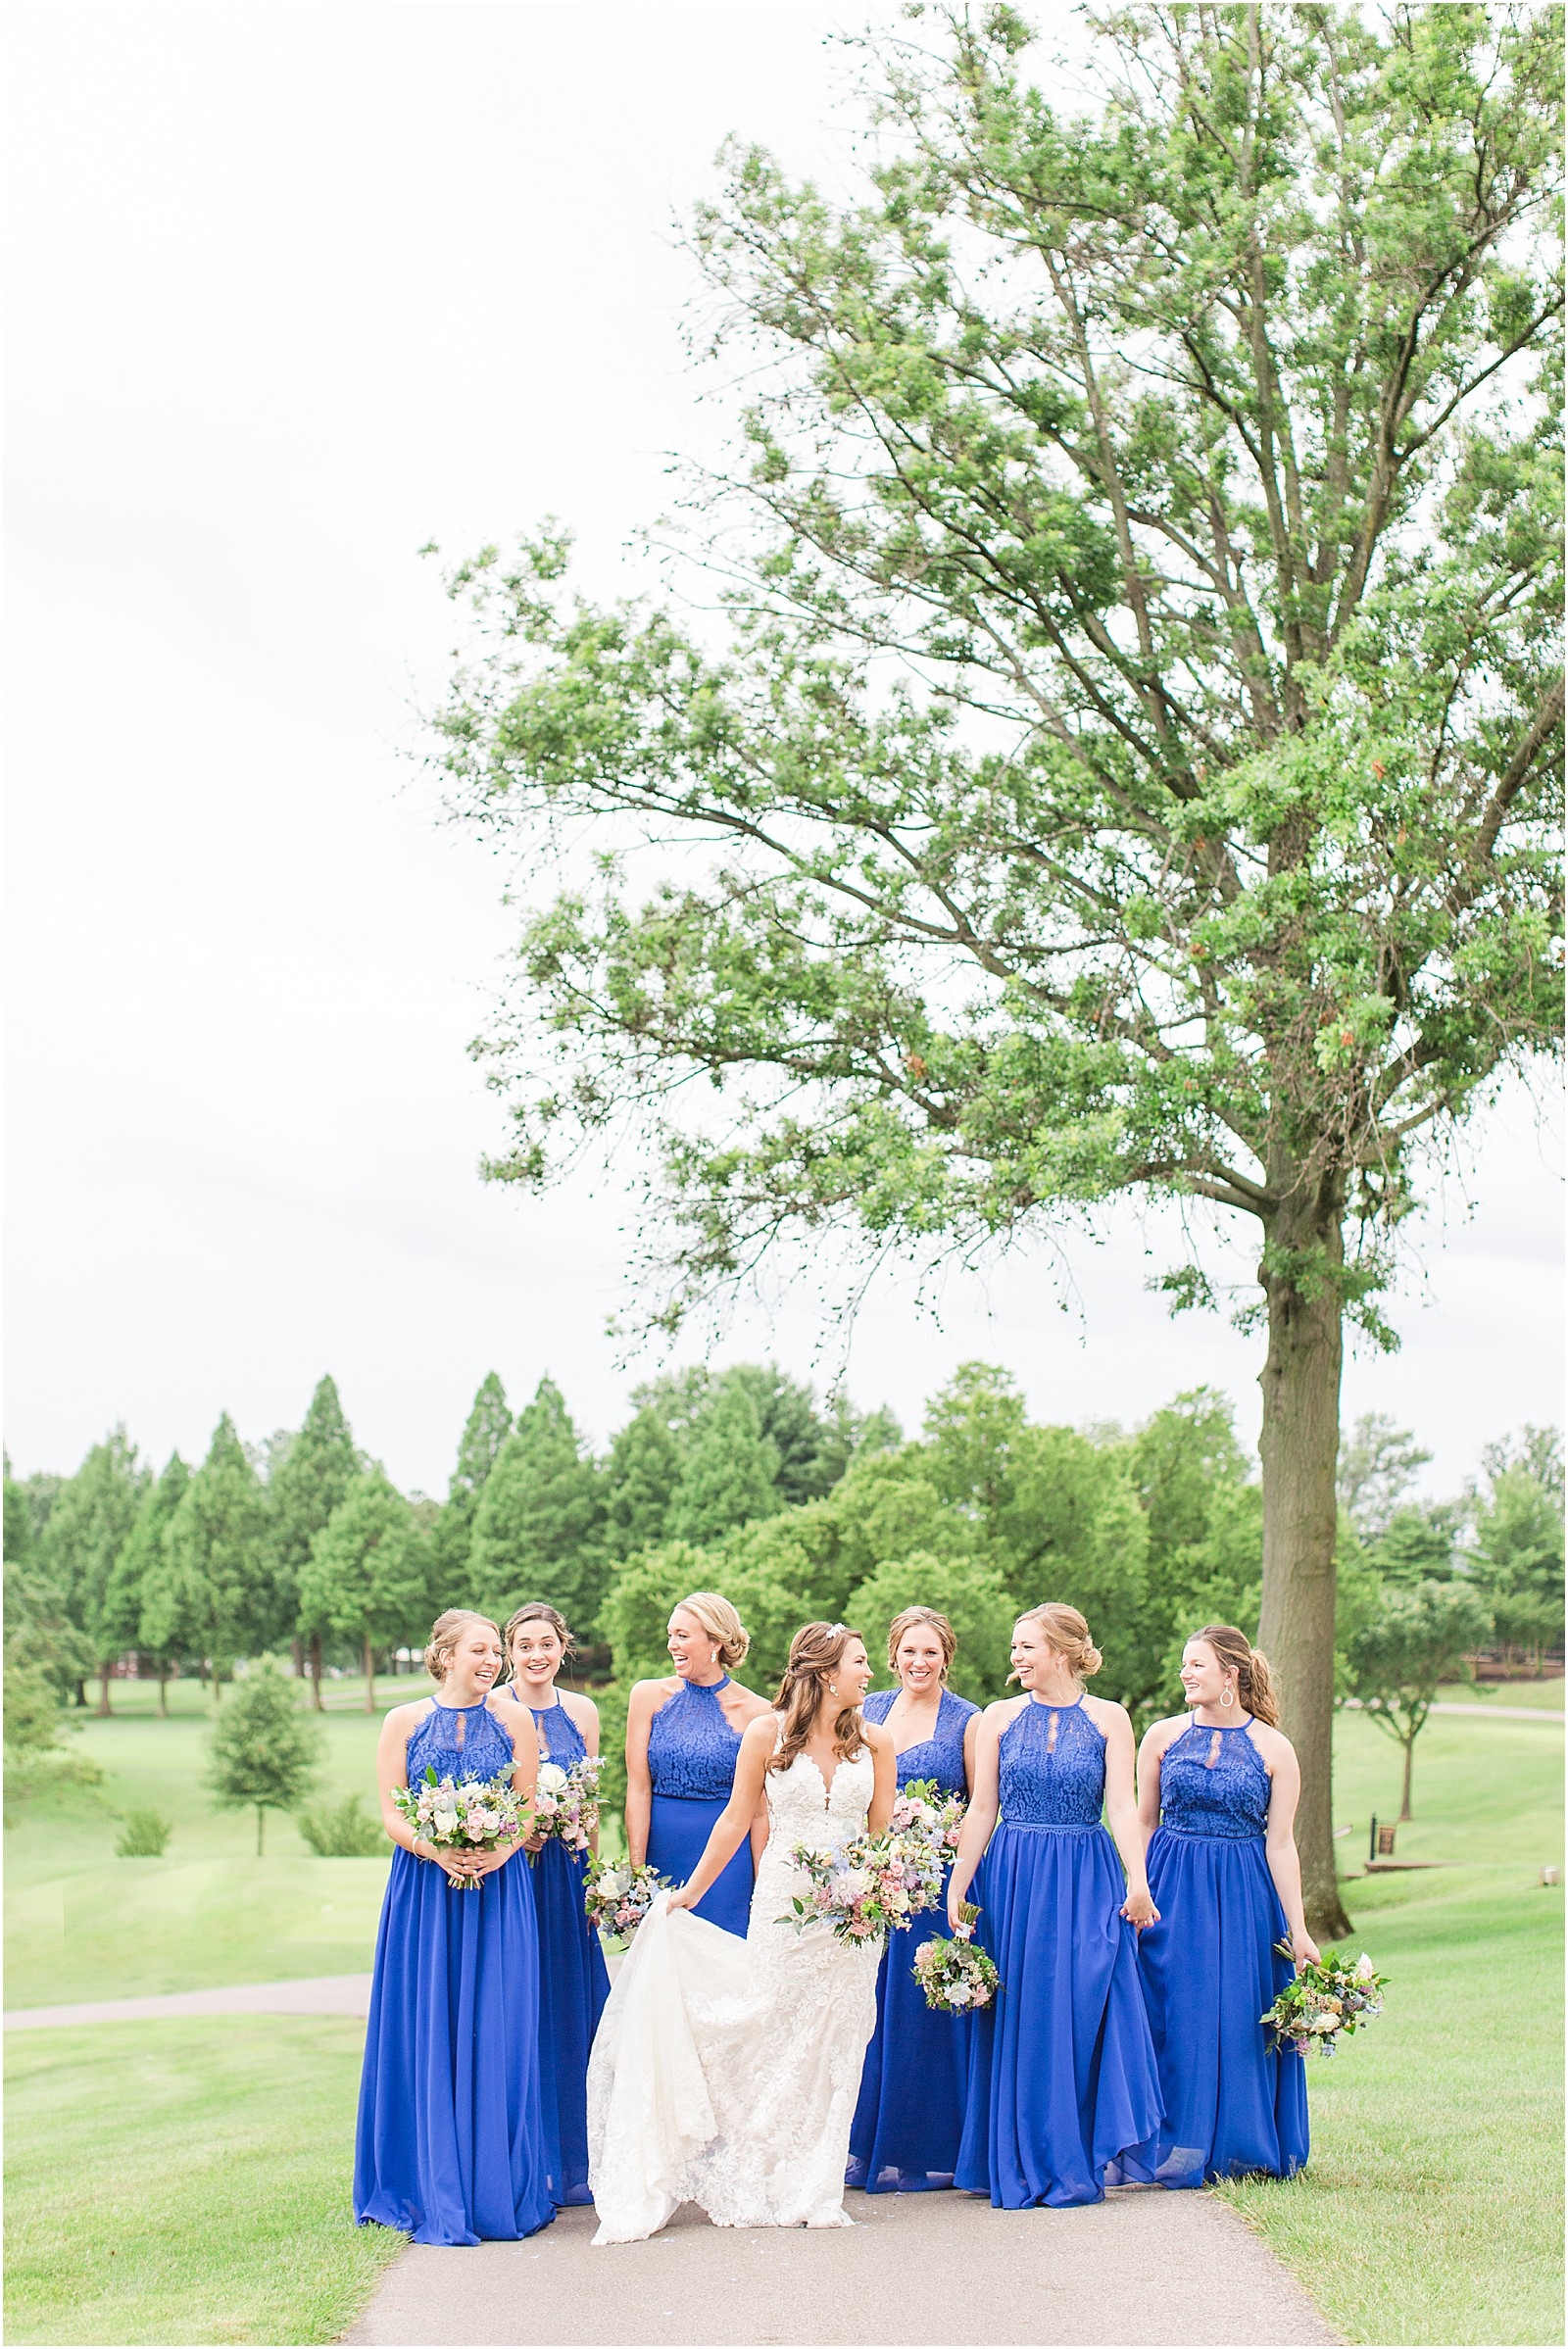 An Evansville County Club Wedding | Abby and Stratton 066.jpg